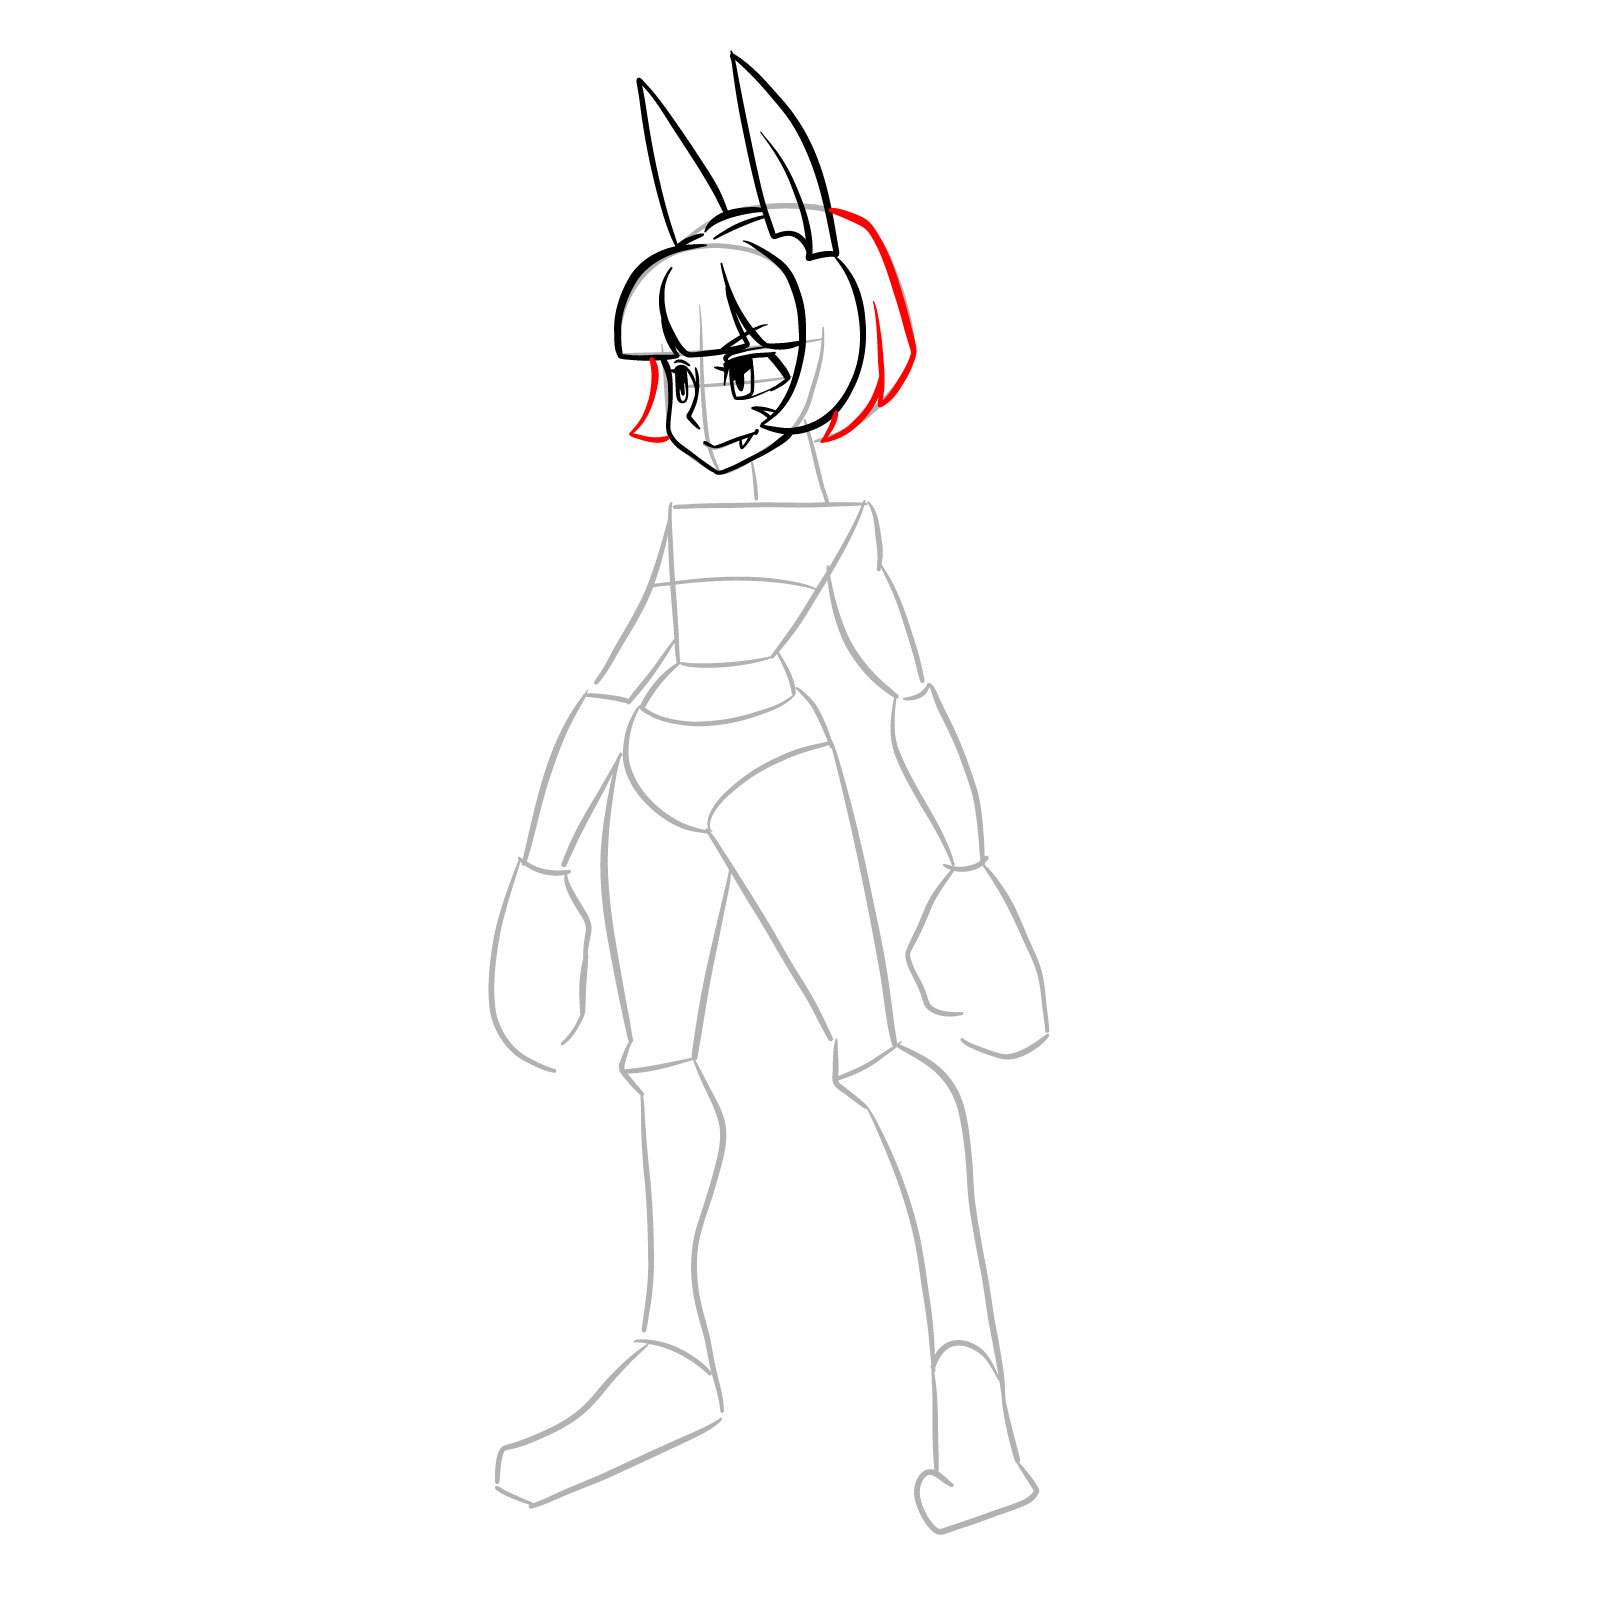 How to draw Ms. Fortune from Skullgirls - step 12